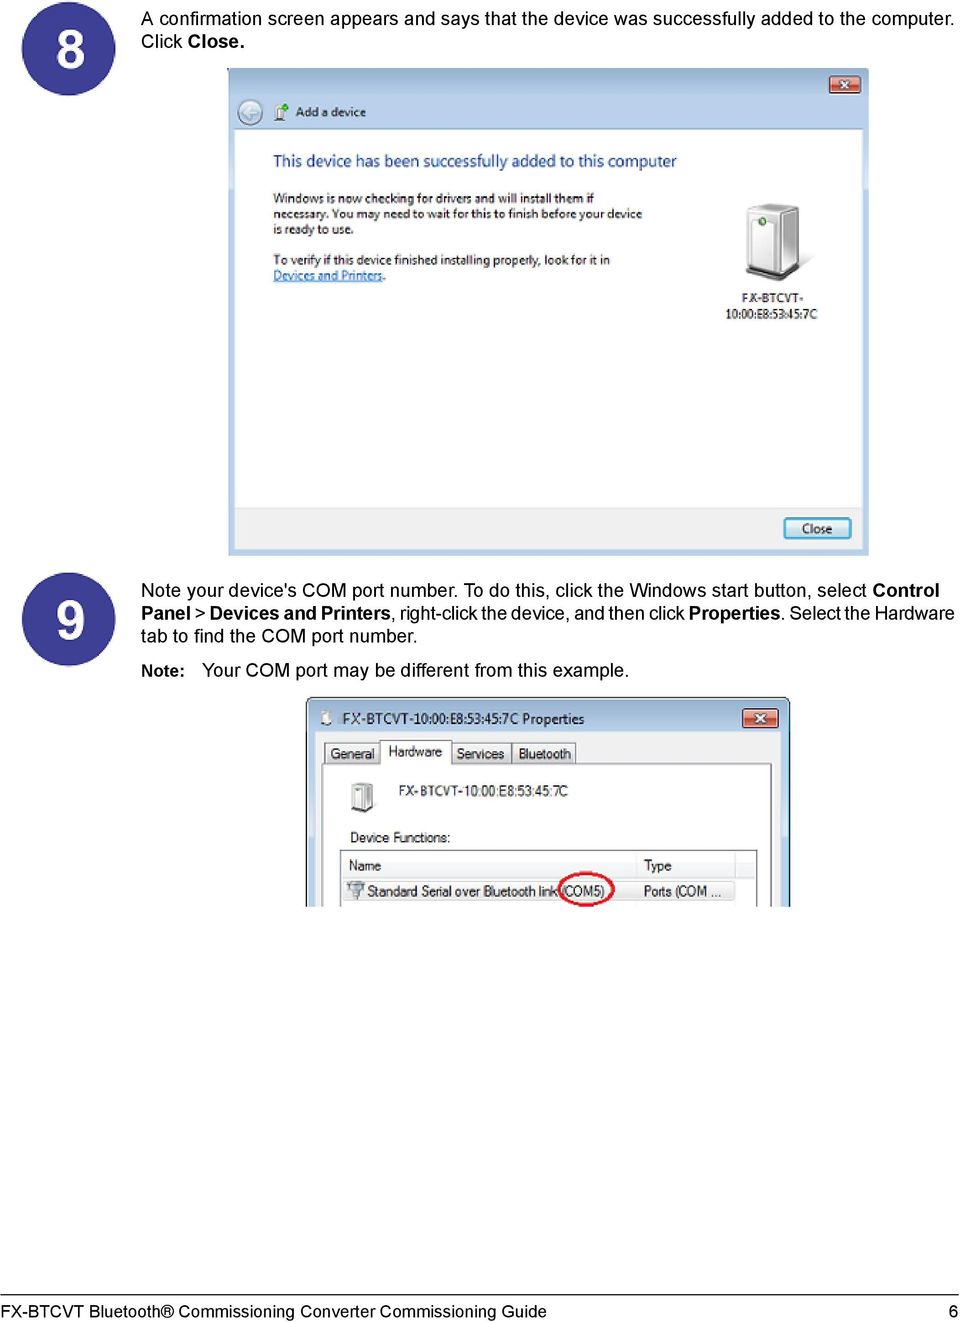 To do this, click the Windows start button, select Control Panel > Devices and Printers,